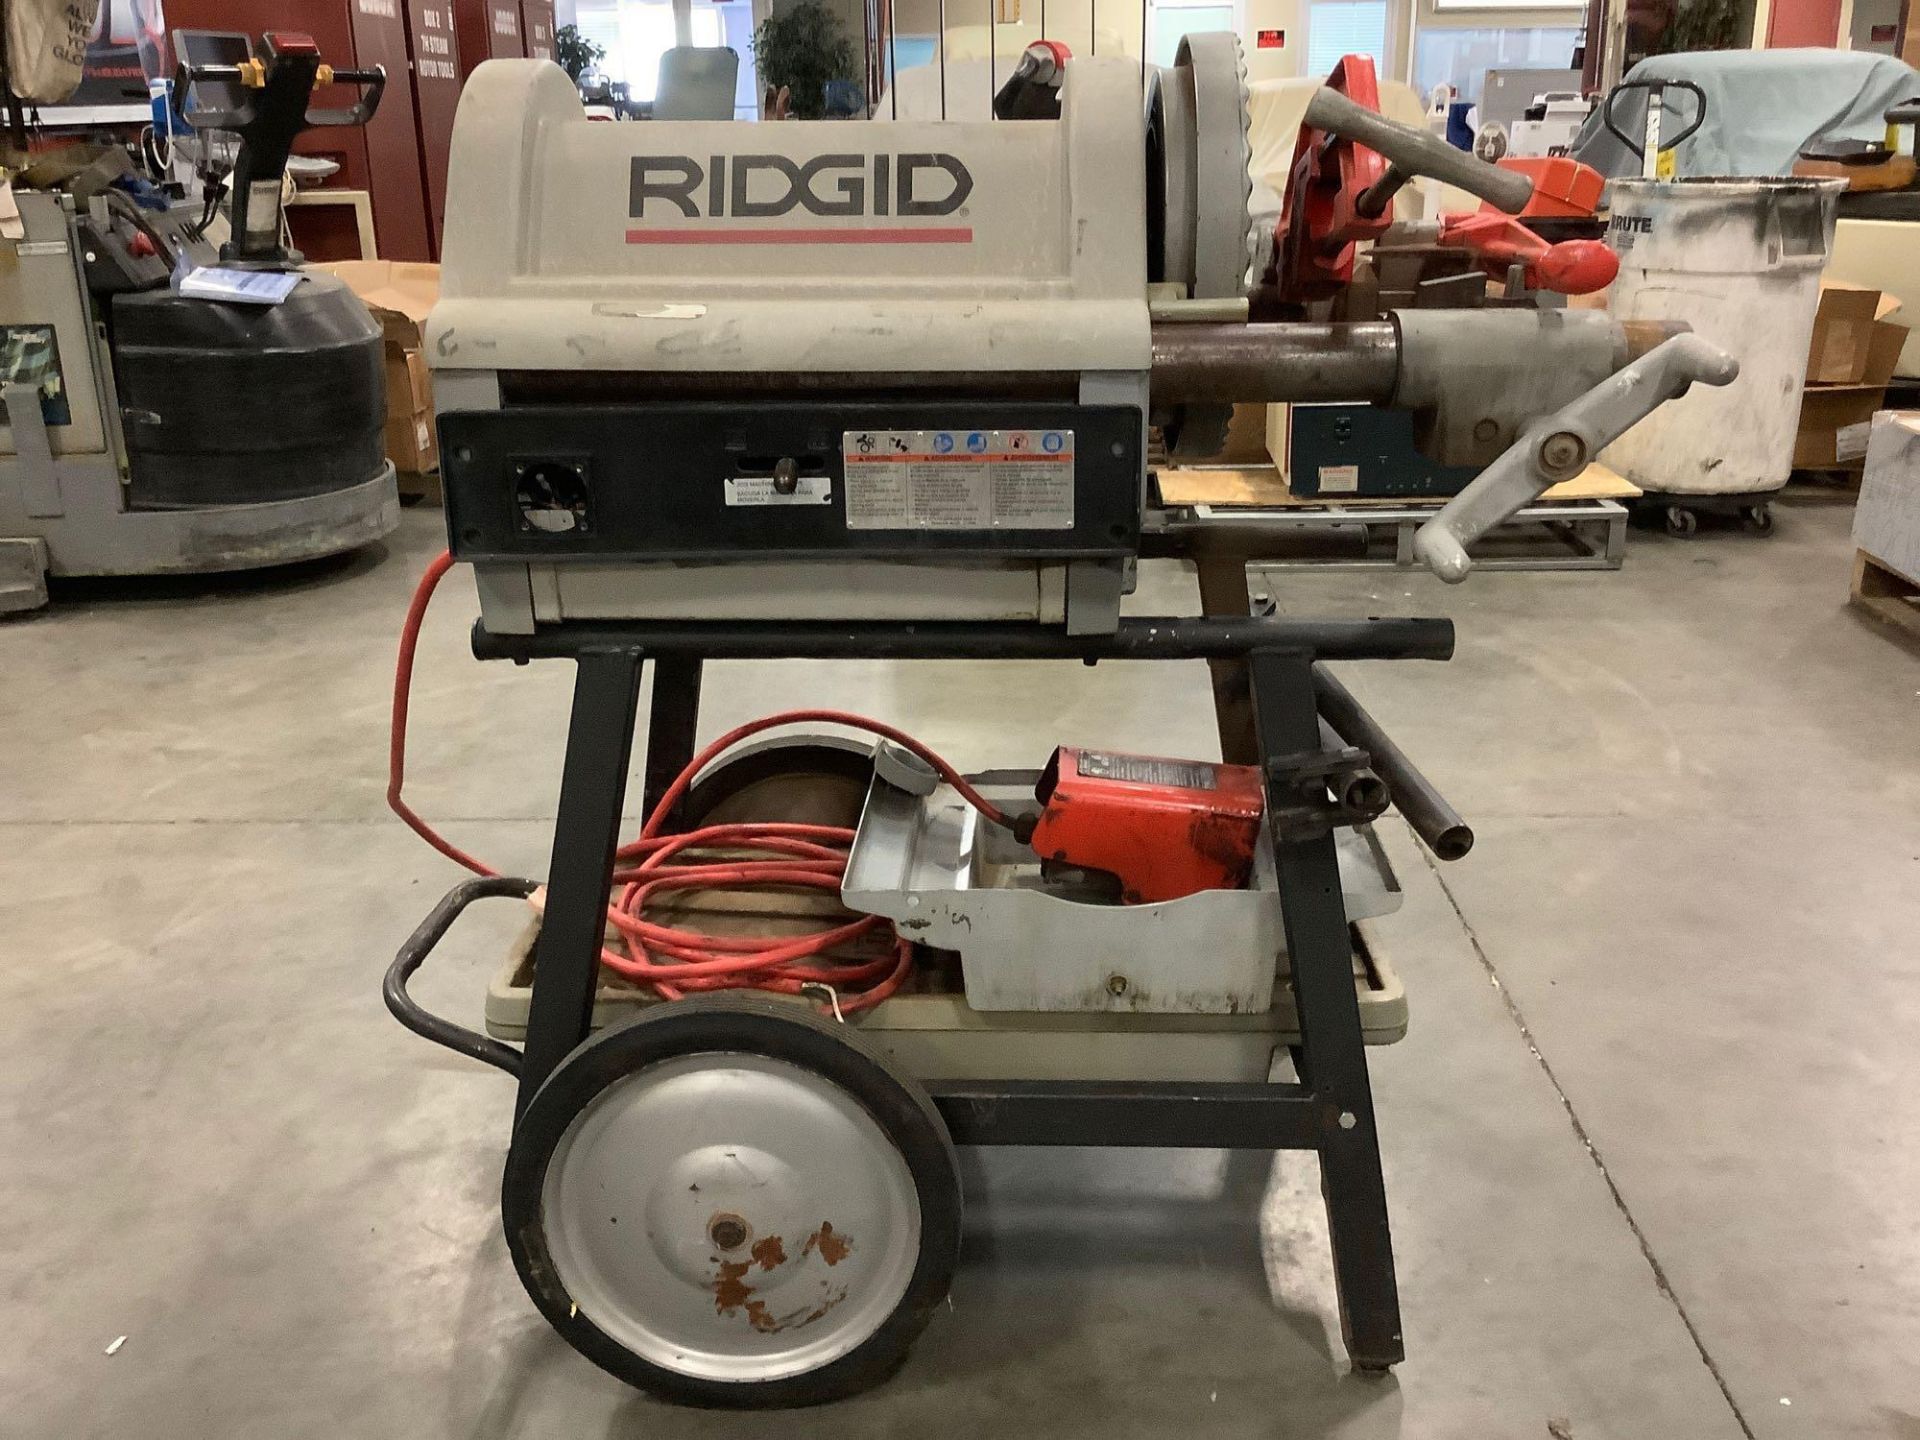 2013 ELECTRIC RIDGID PIPE THREADER MODEL 1224 WITH STAND, APPROX 120 VOLTS,APPROX AMP 15,APPROX HZ 6 - Image 5 of 10